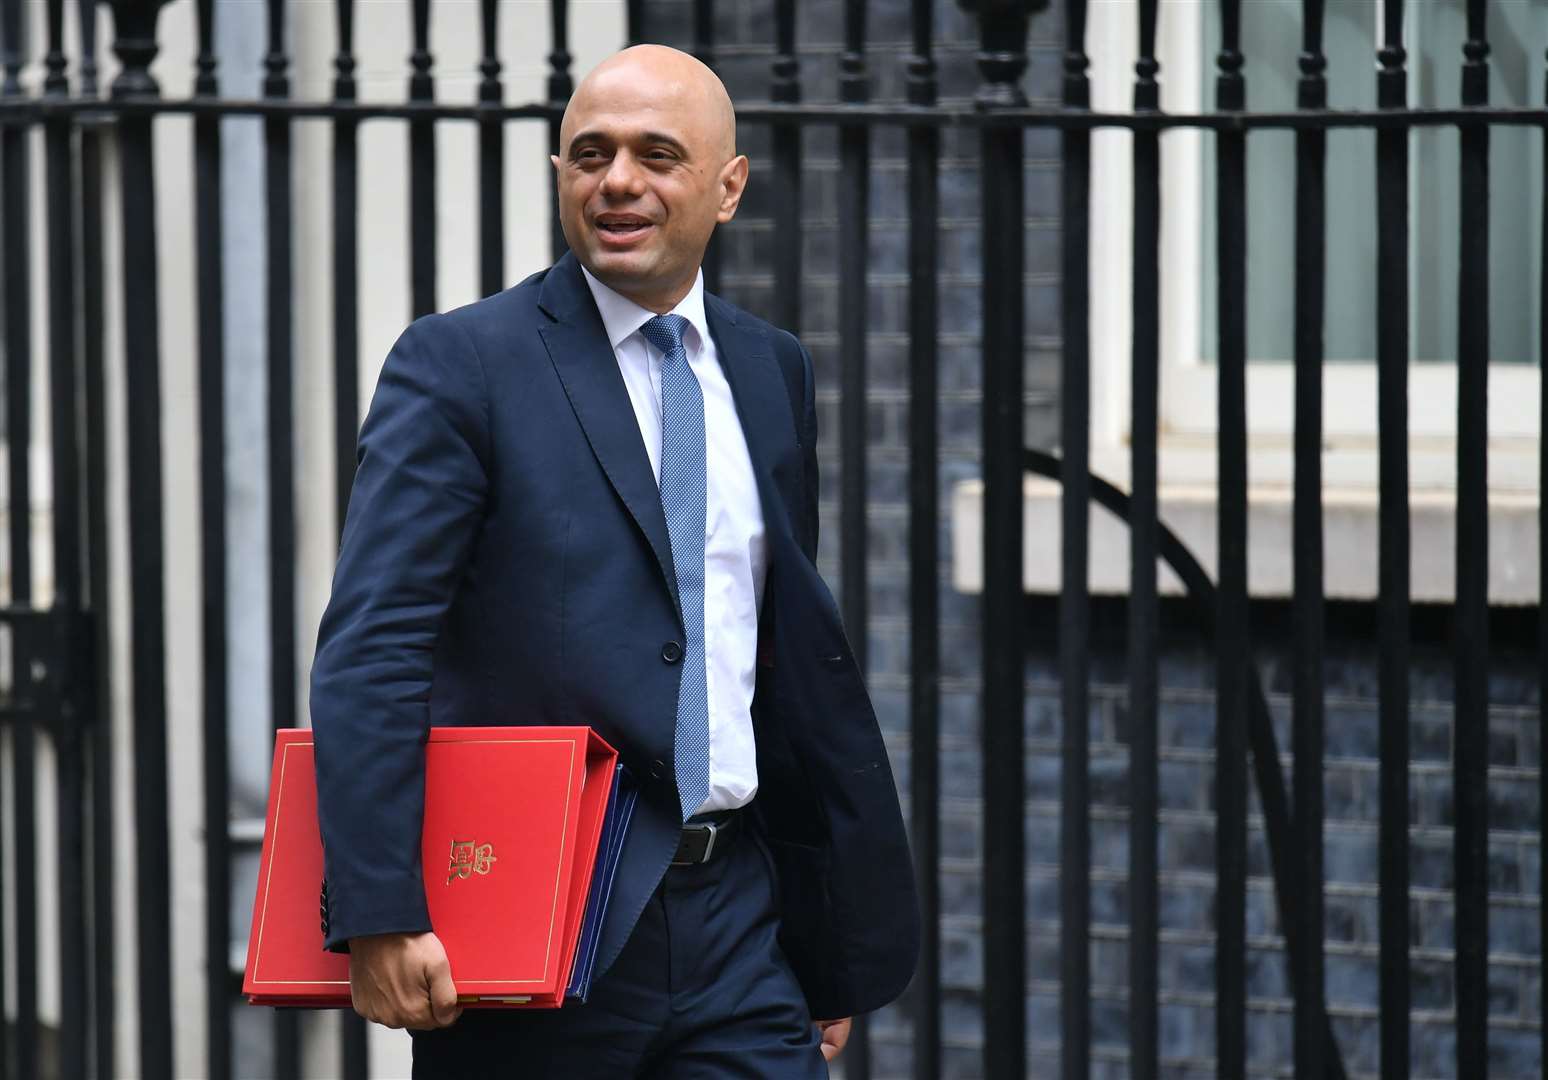 Sajid Javid announced a ‘major incident’ in the Channel (Dominic Lipinski/PA)